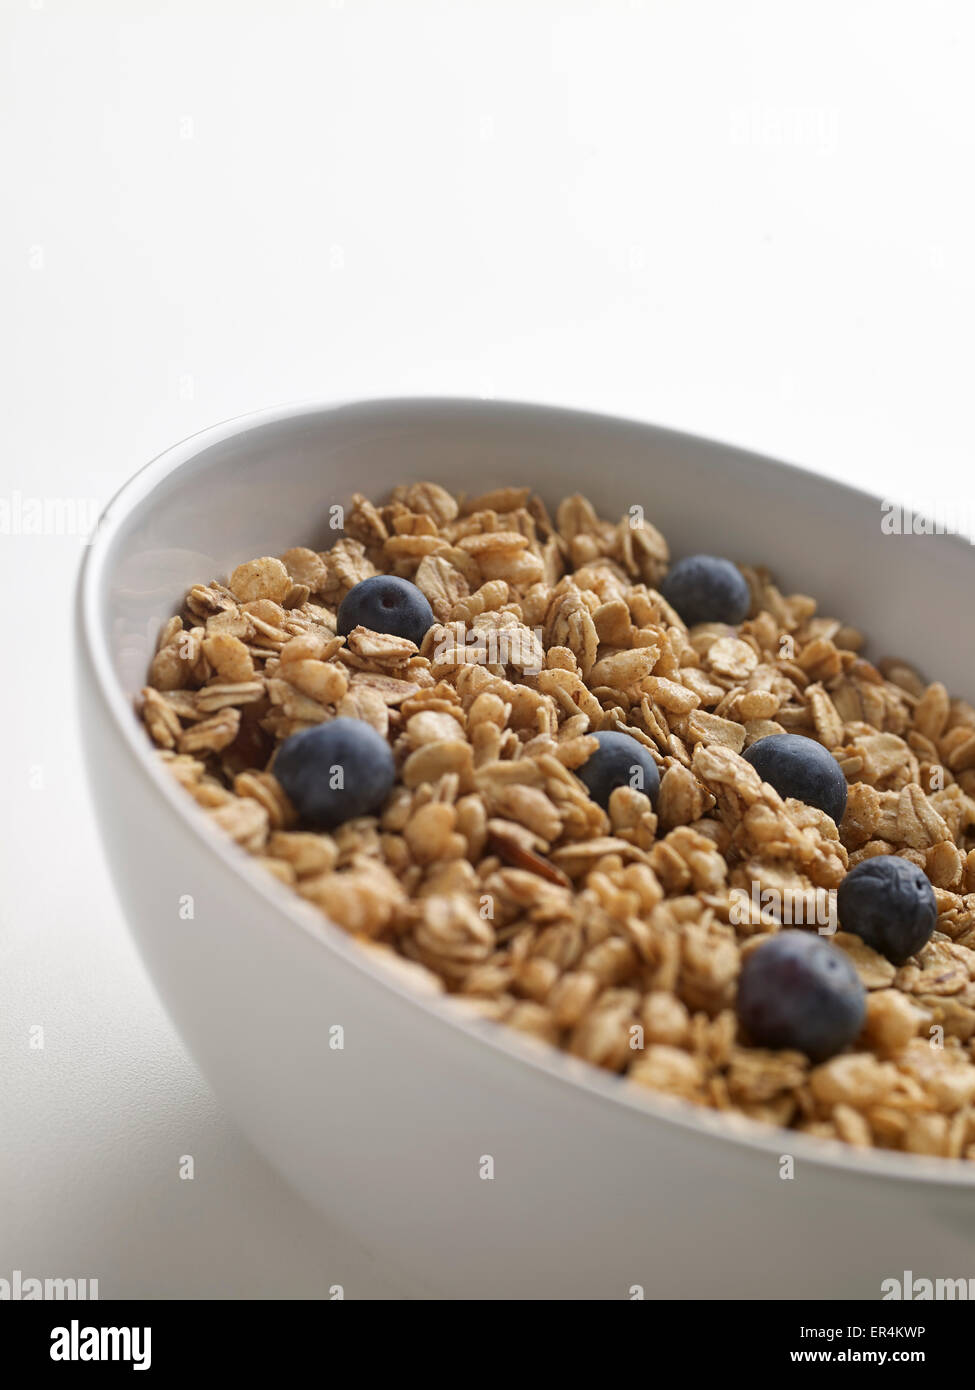 Bowl Of Granola Cereal With Blueberries Stock Photo